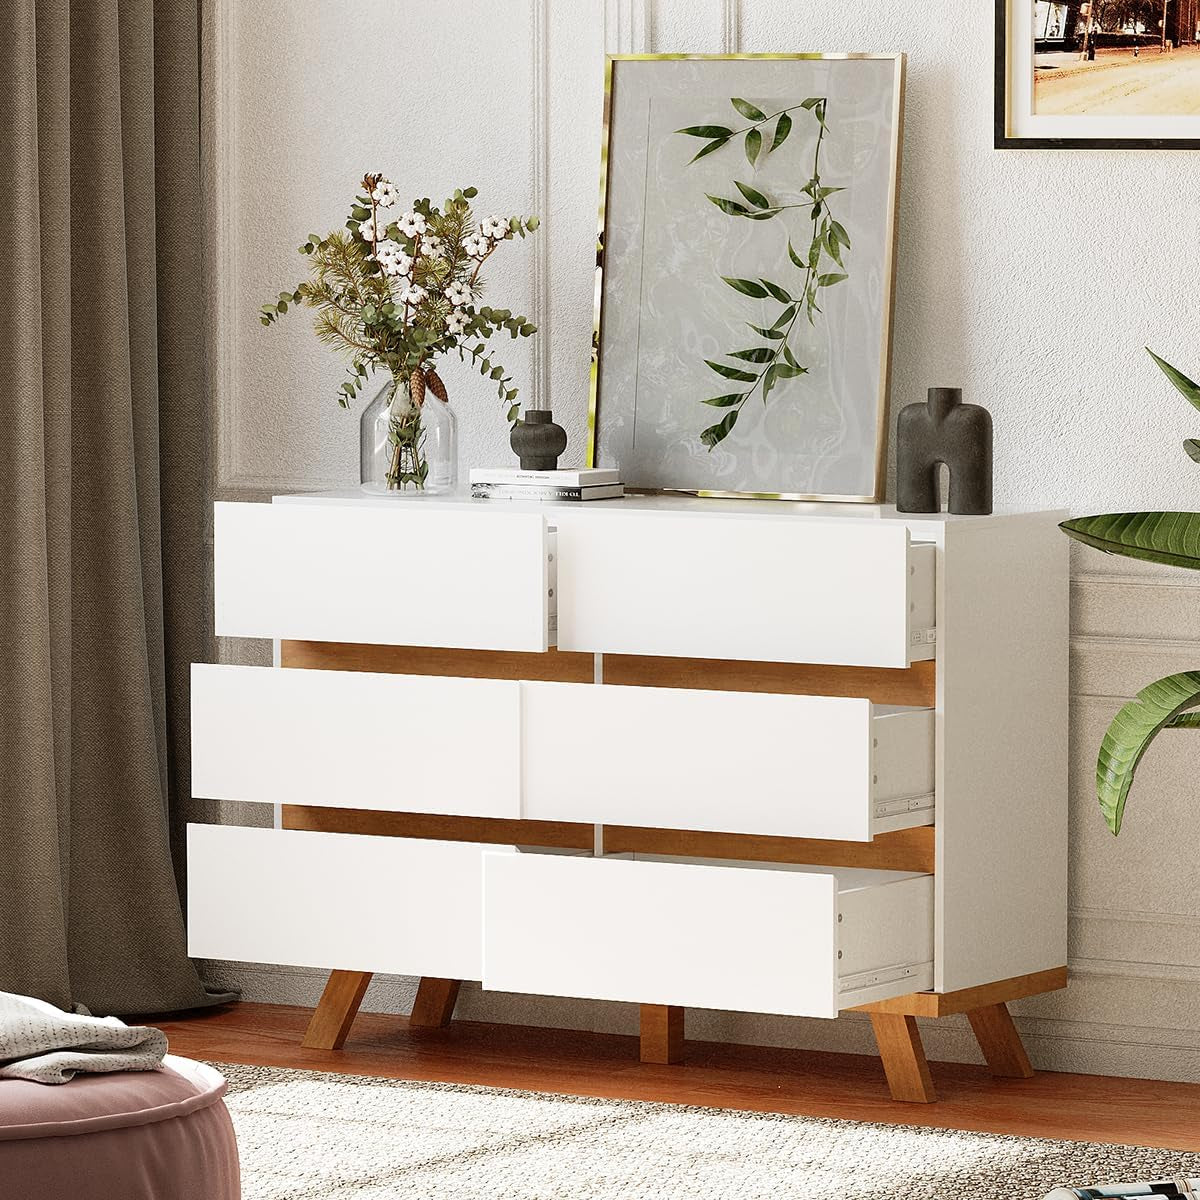 White Wooden Dresser with 6 Deep Drawers, 6 Chest of Drawers Double Dressers, Modern Storage Cabinet for Bedroom, Living Room, Hallway, Entryway - White